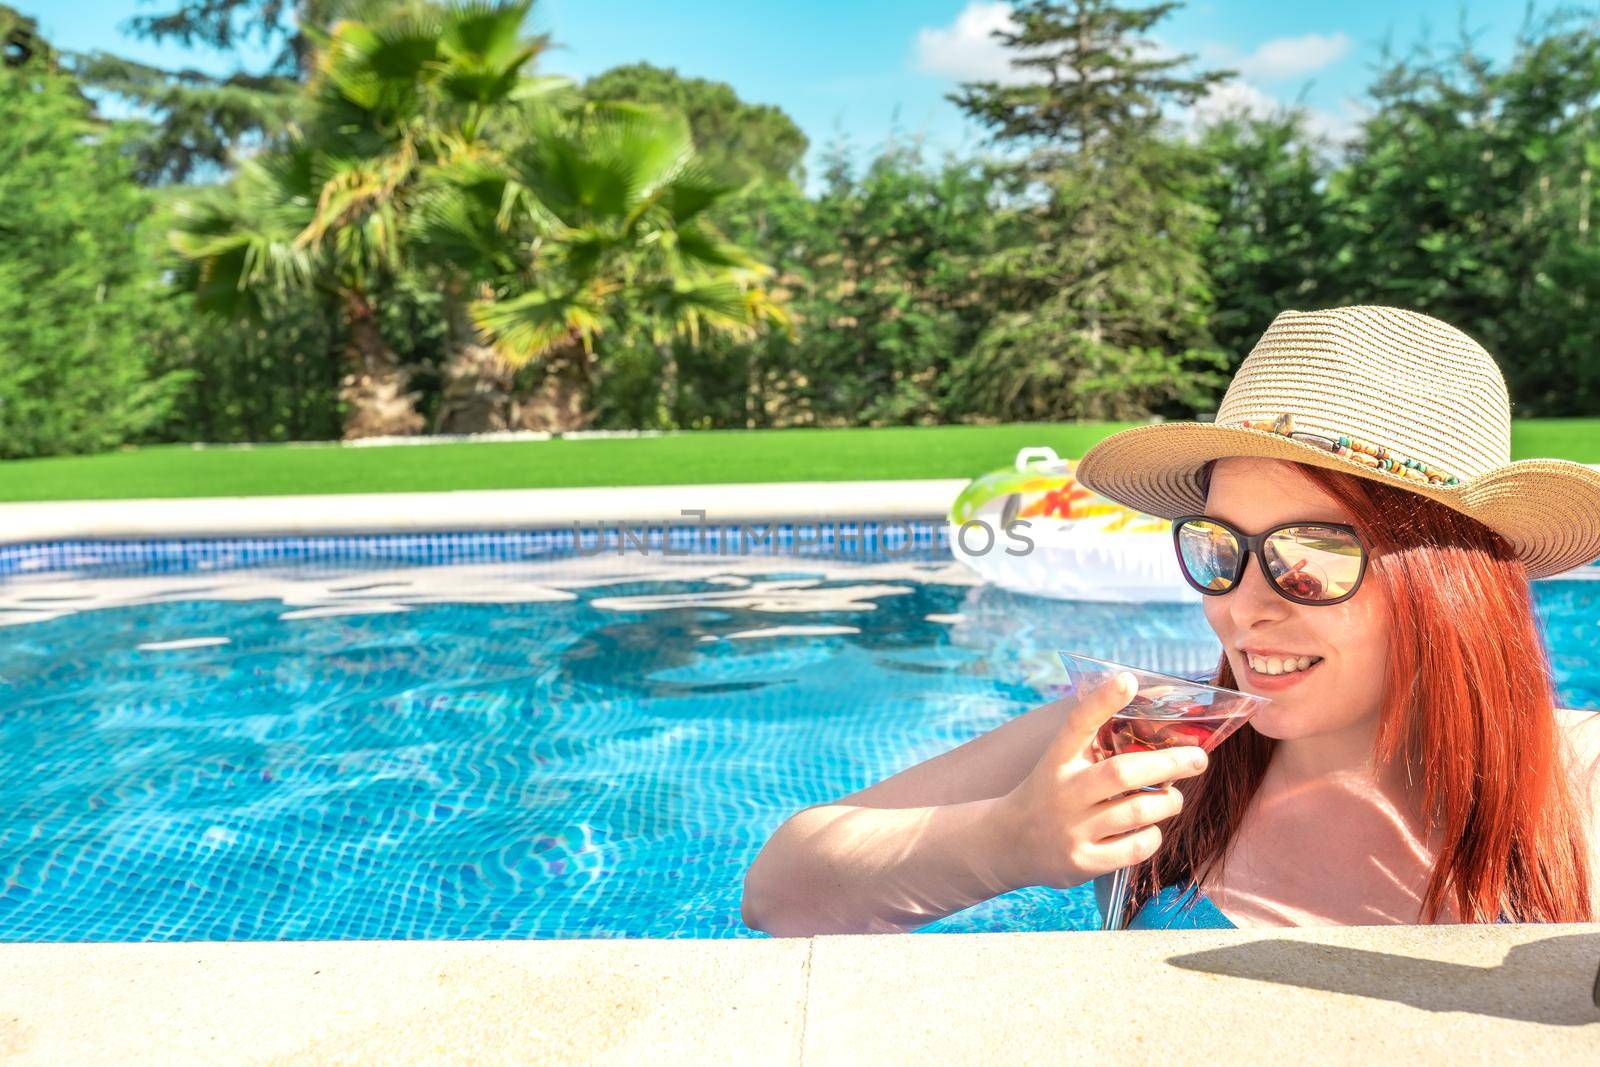 young woman with hat and sunglasses, having a refreshing drink inside the swimming pool. young girl on summer holiday sunbathing by the pool. concept of summer and free time. outdoor garden, natural sunlight.